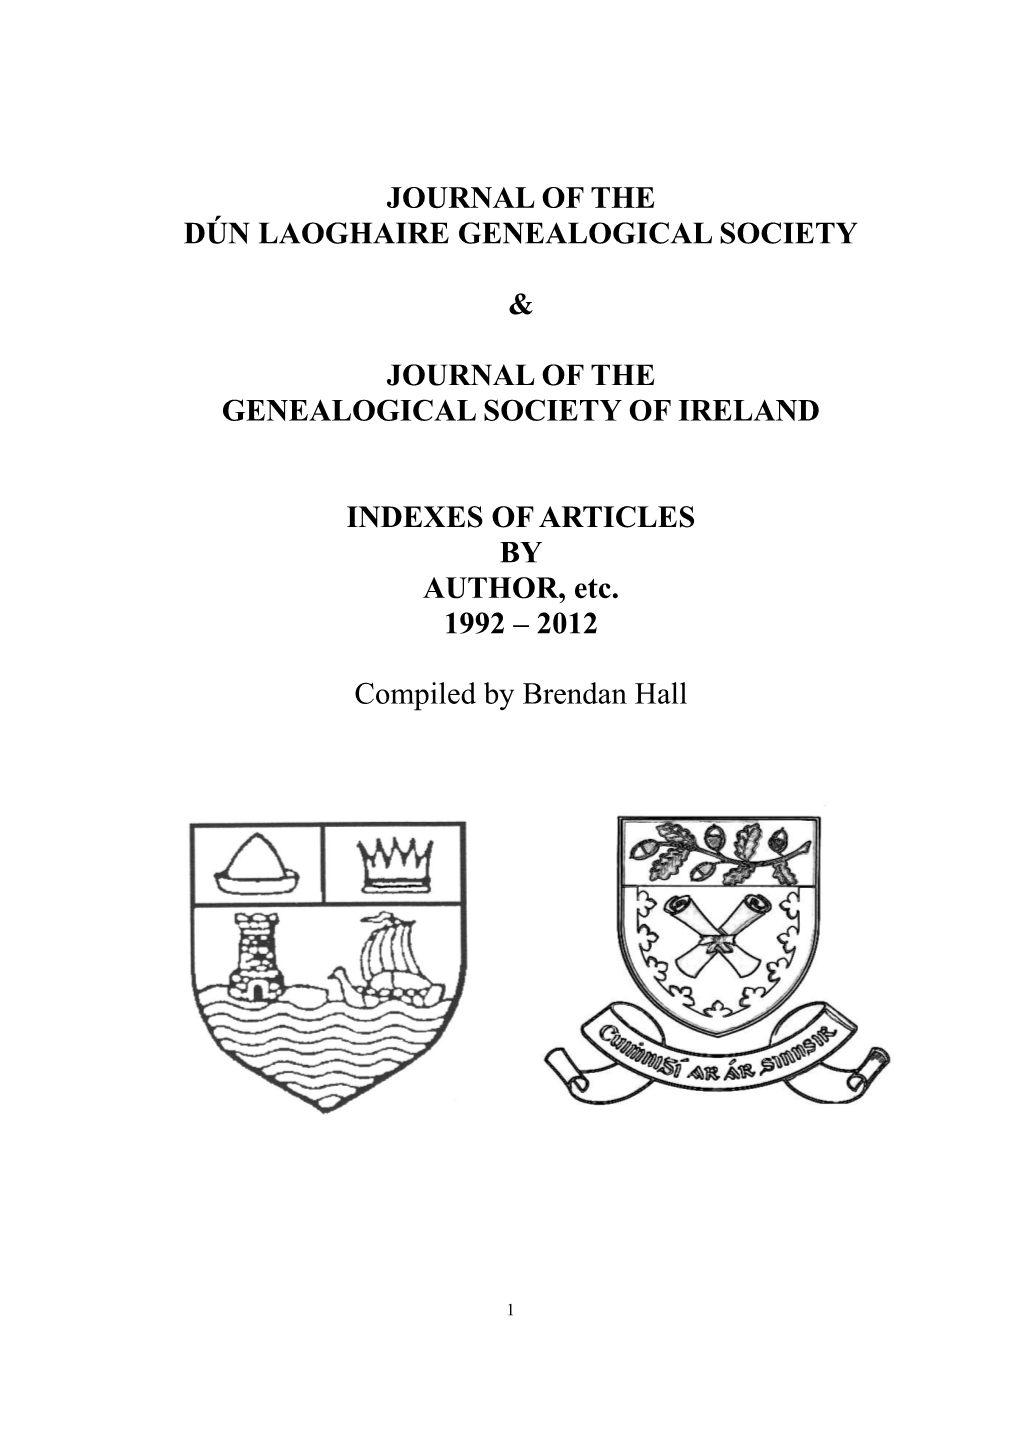 Published by Genealogical Society of Ireland Ltd., Dún Laoghaire, Co